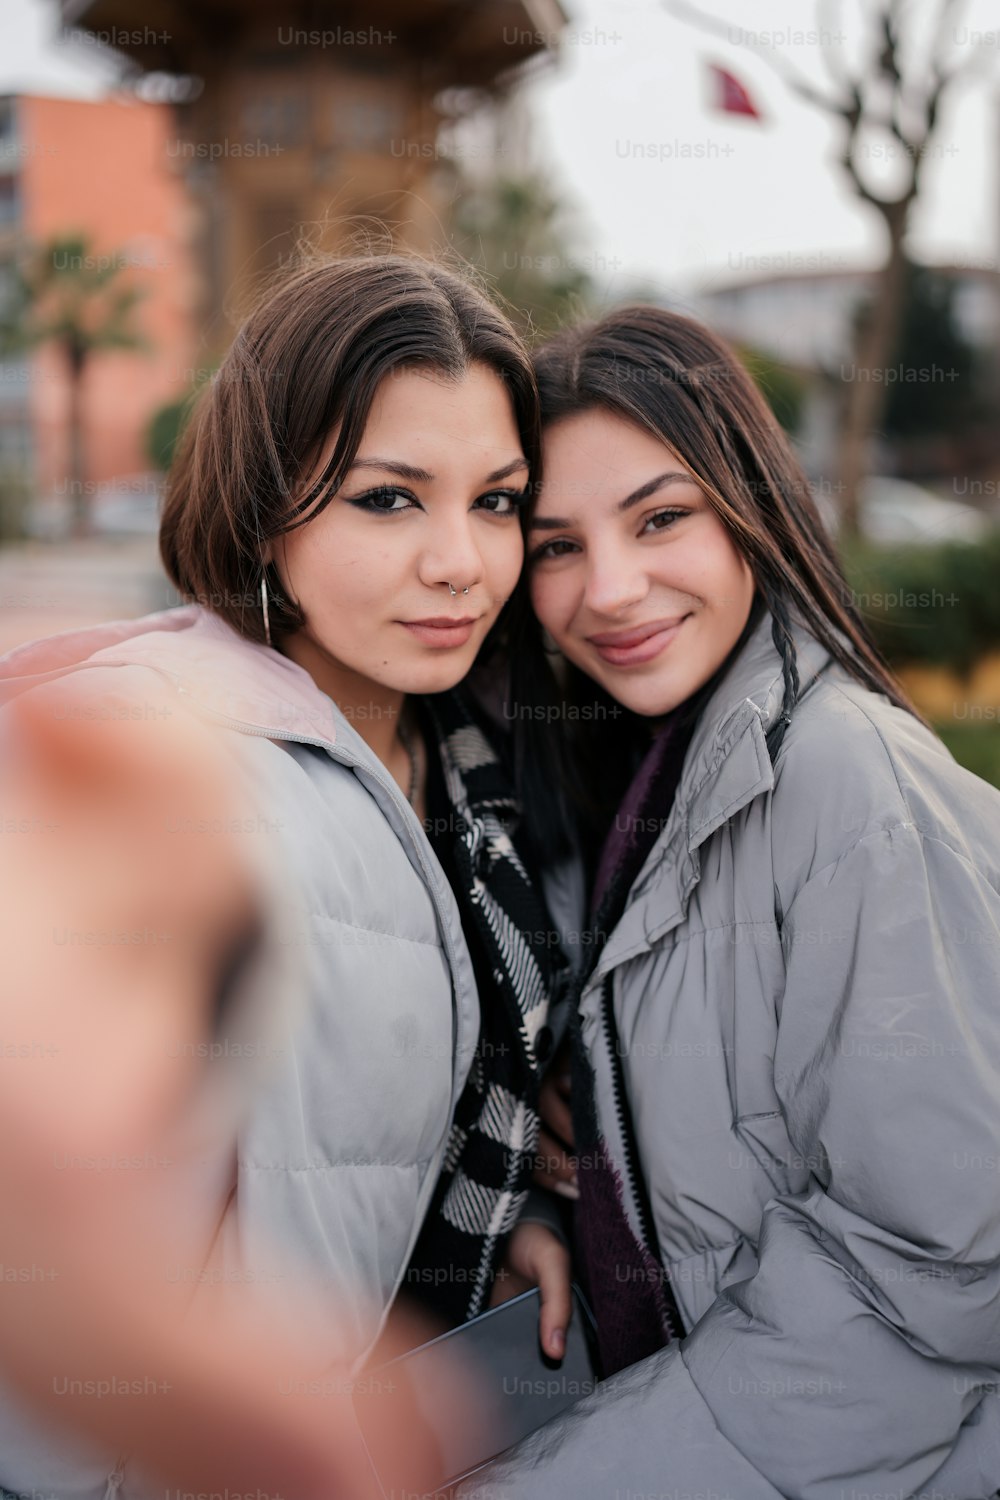 two women are posing for a picture together